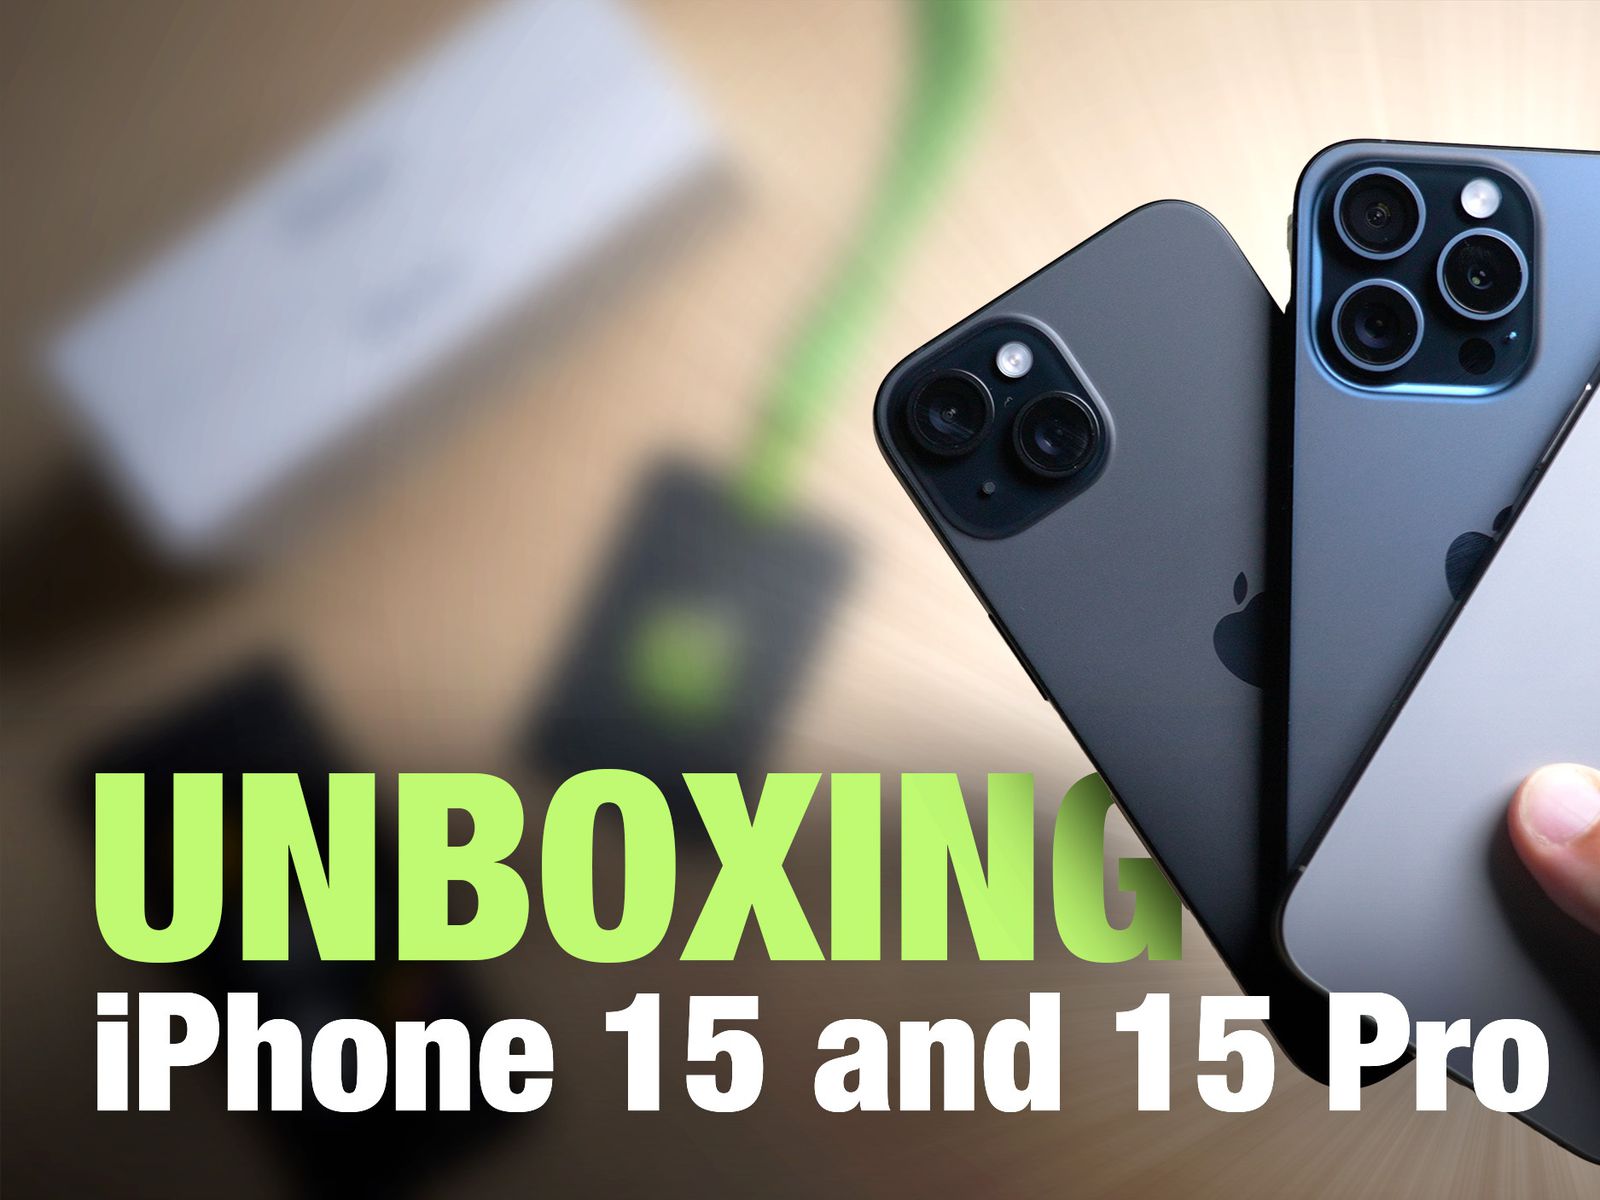 Video: iPhone 15 and iPhone 15 Pro Unboxing - MacRumors